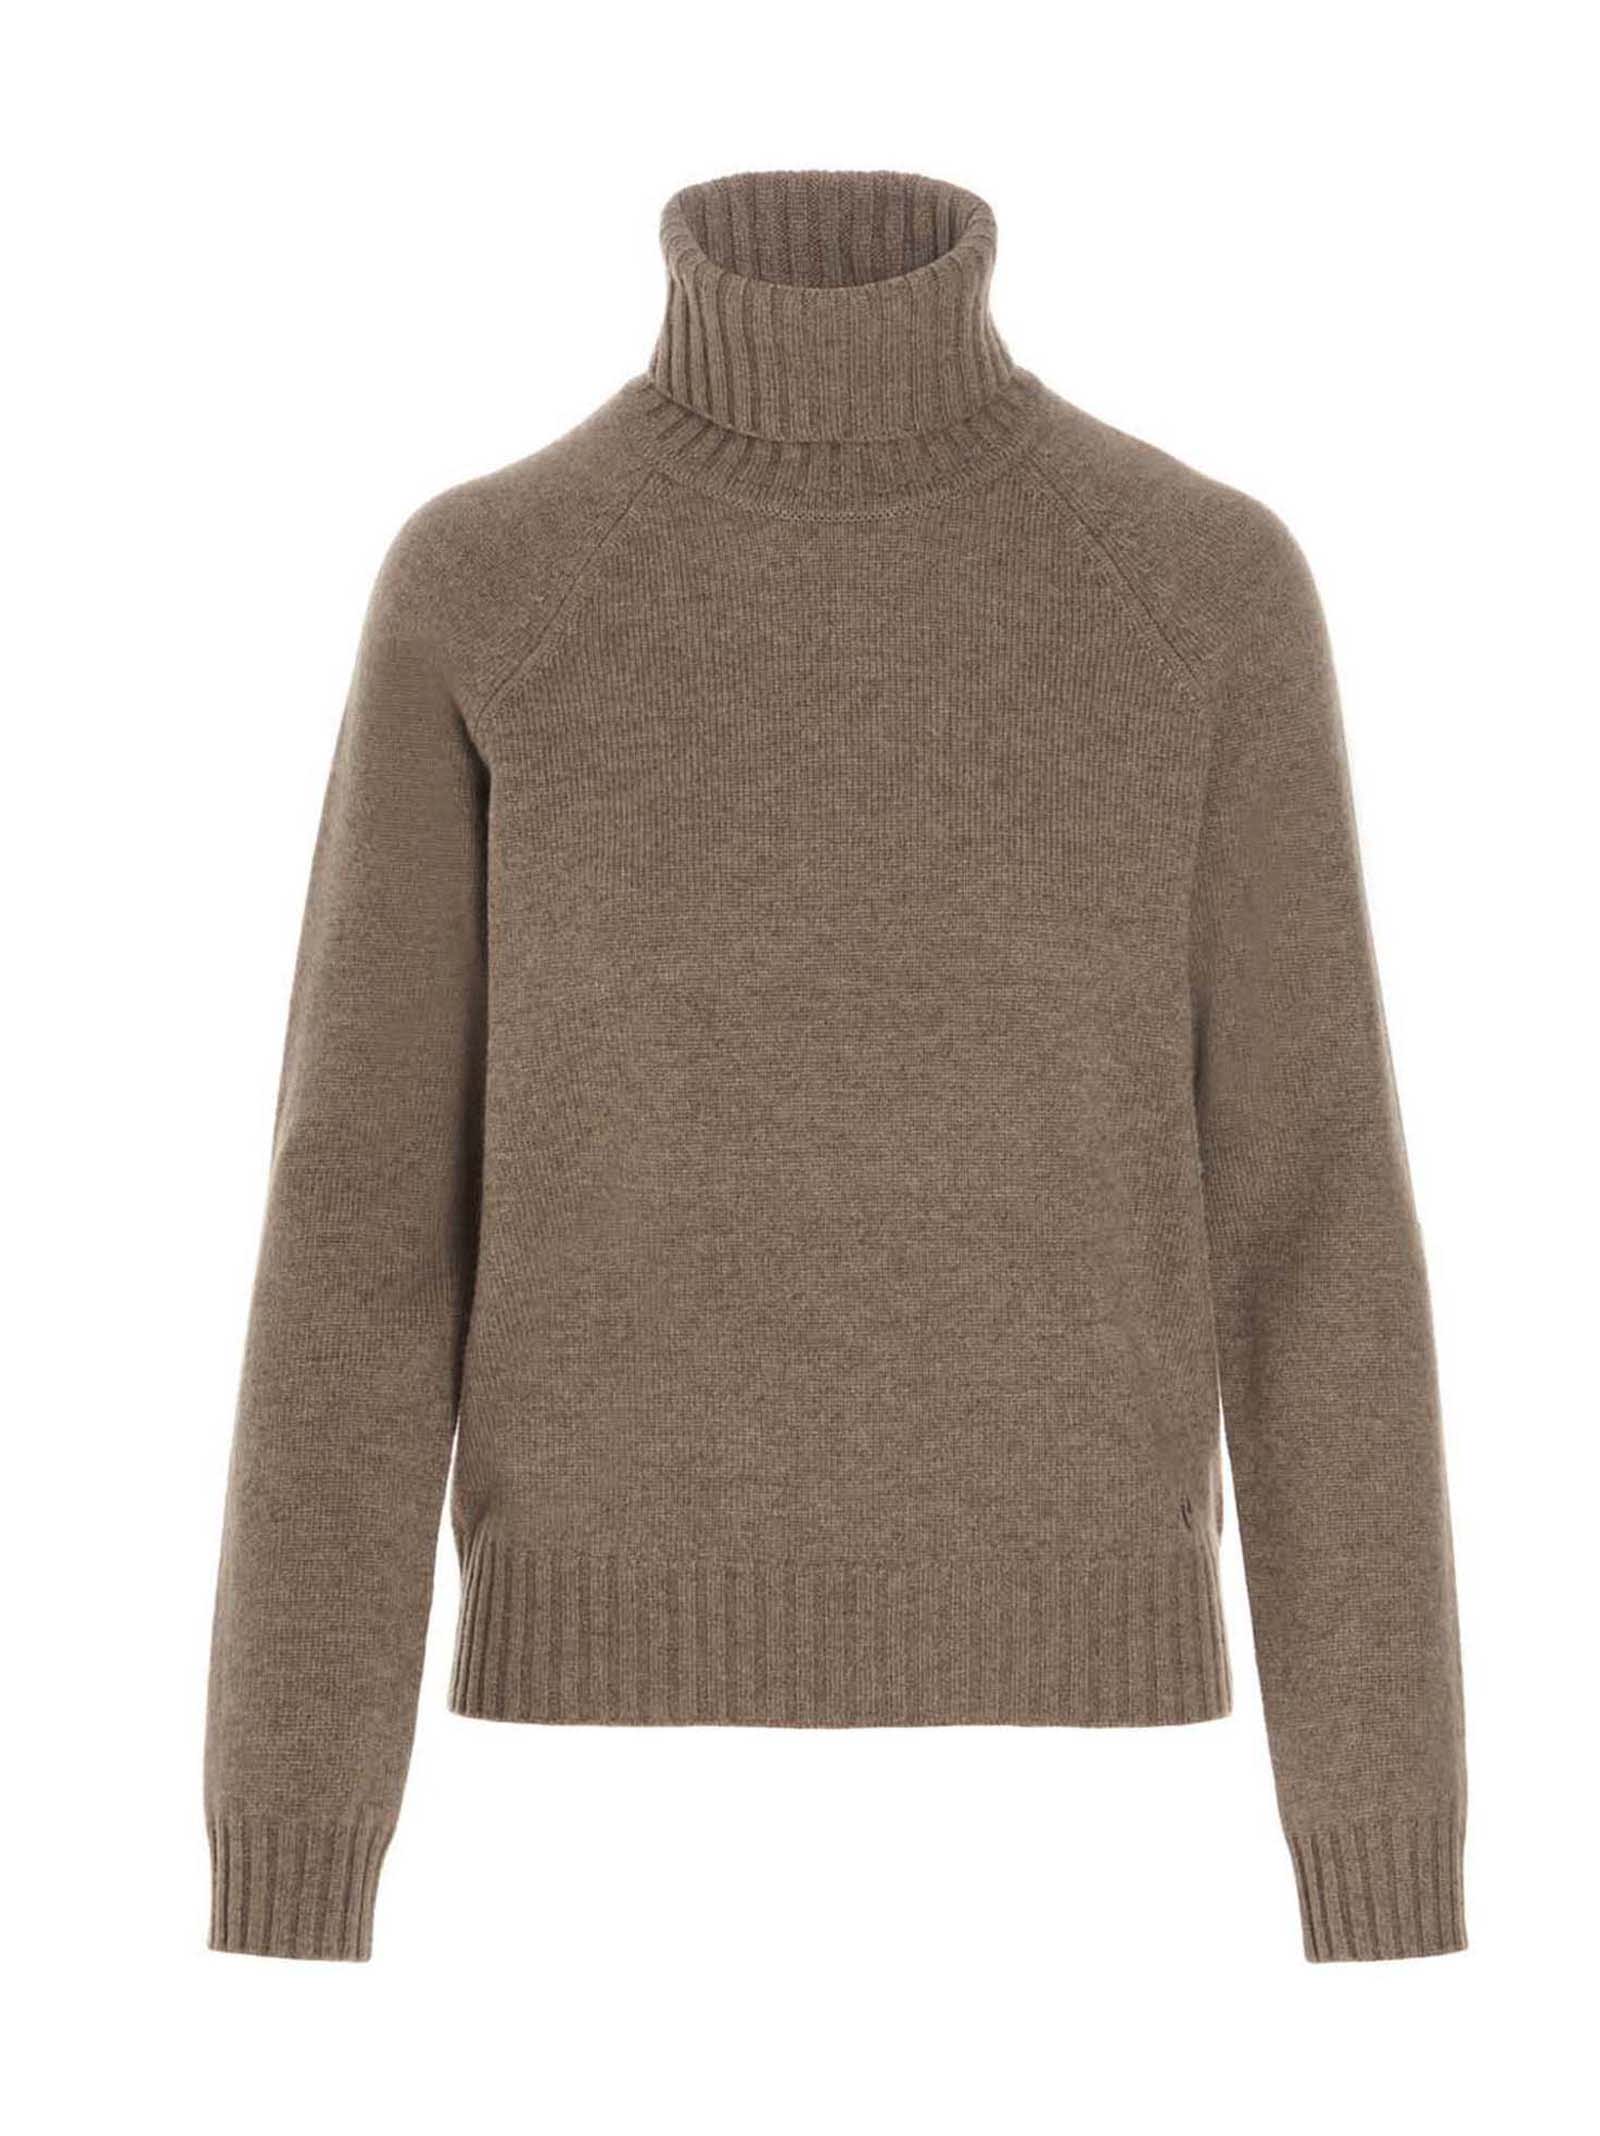 Tory Burch Polo Neck Cashmere Sweater